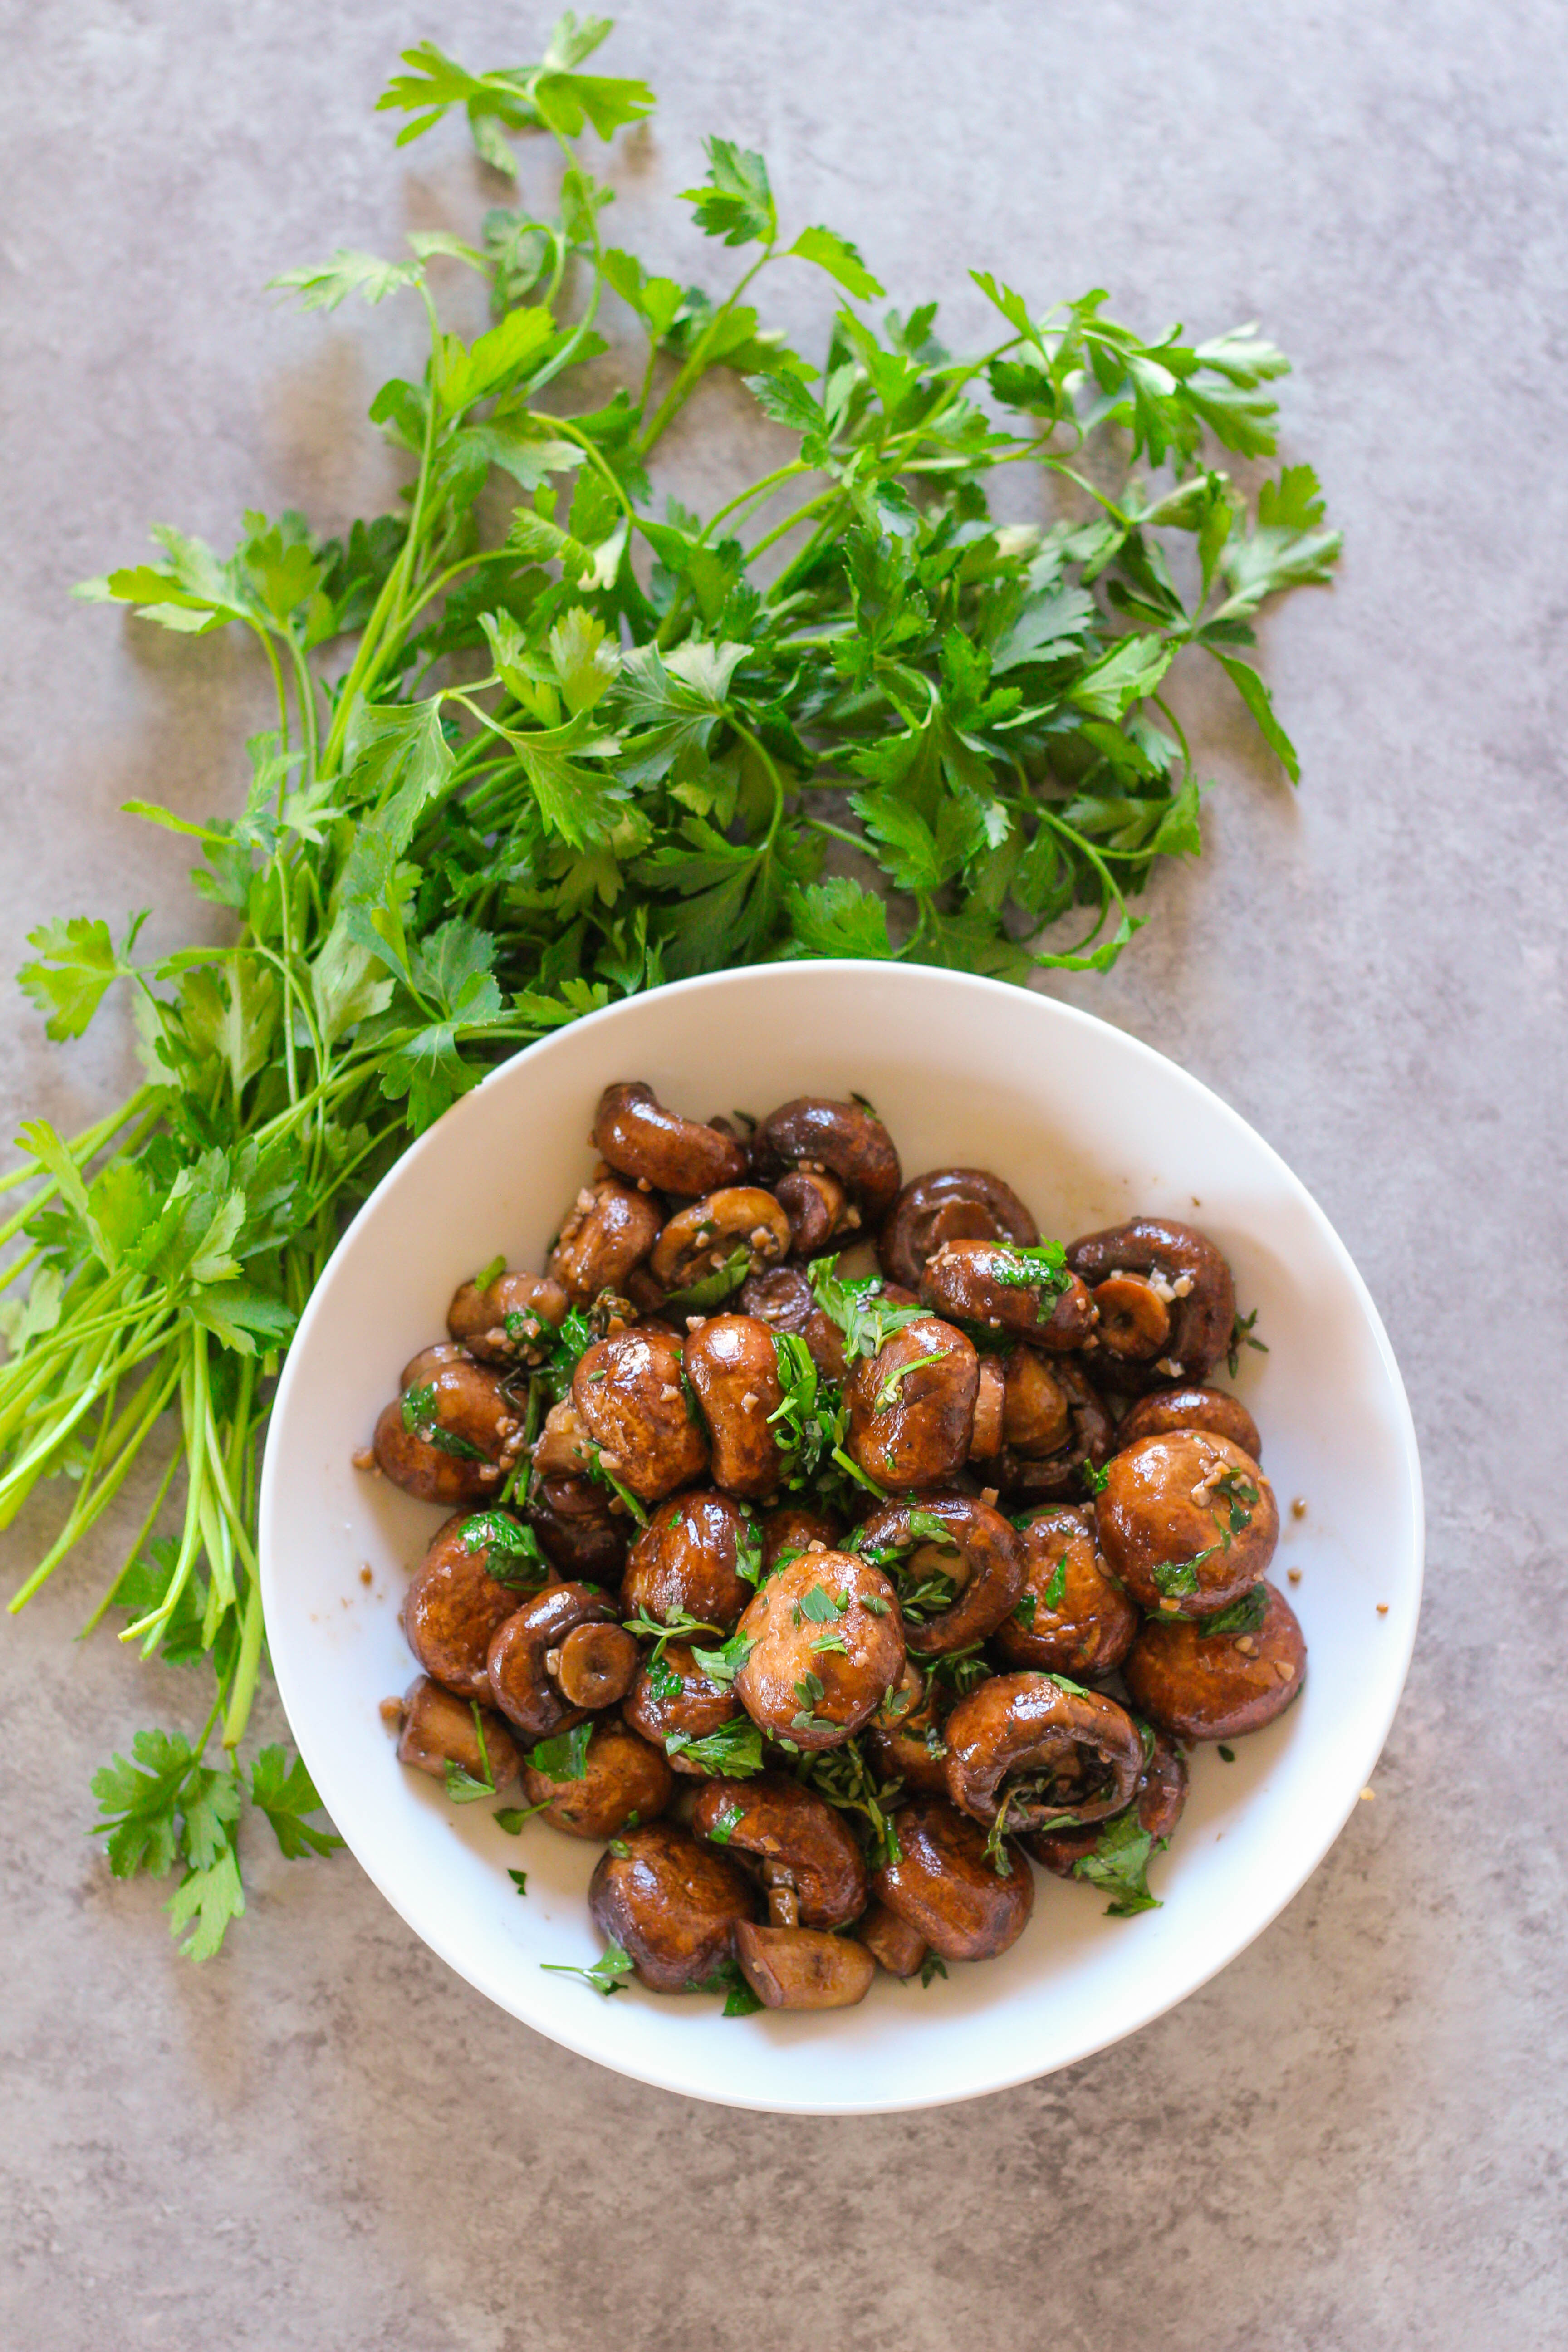 The perfect Spring side dish: savory cremini sauteed mushrooms in buttery ghee and tossed with fresh herbs. 